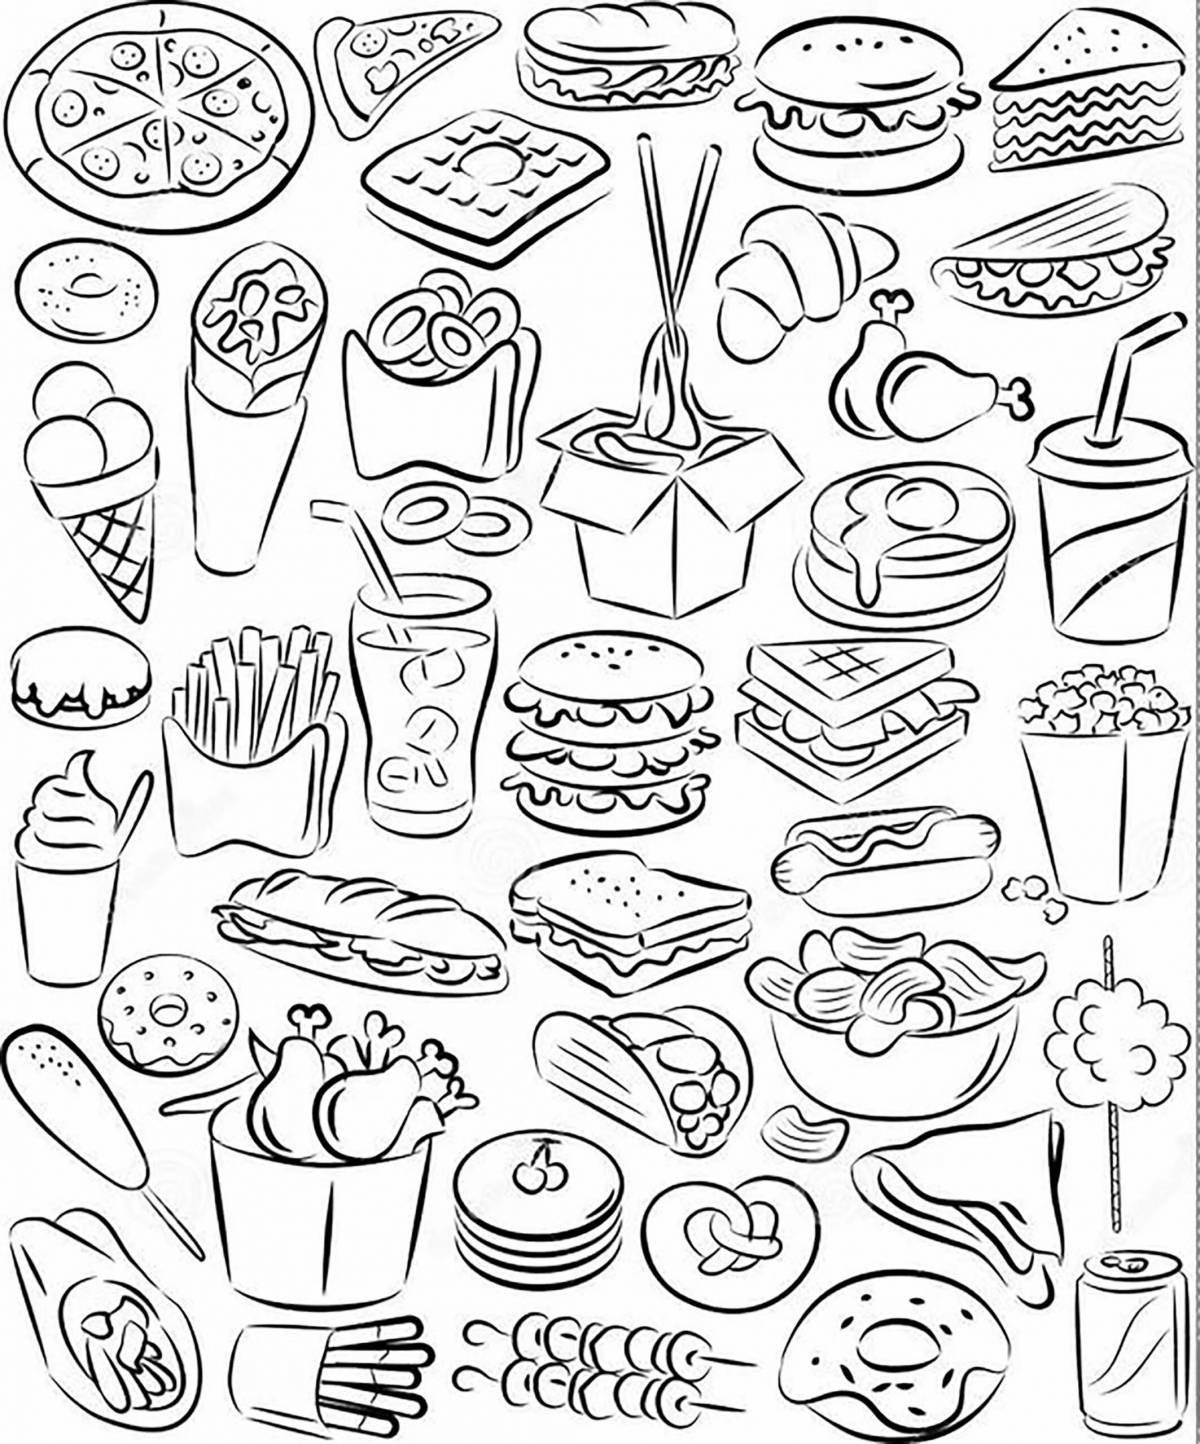 Sweet aesthetic food coloring page